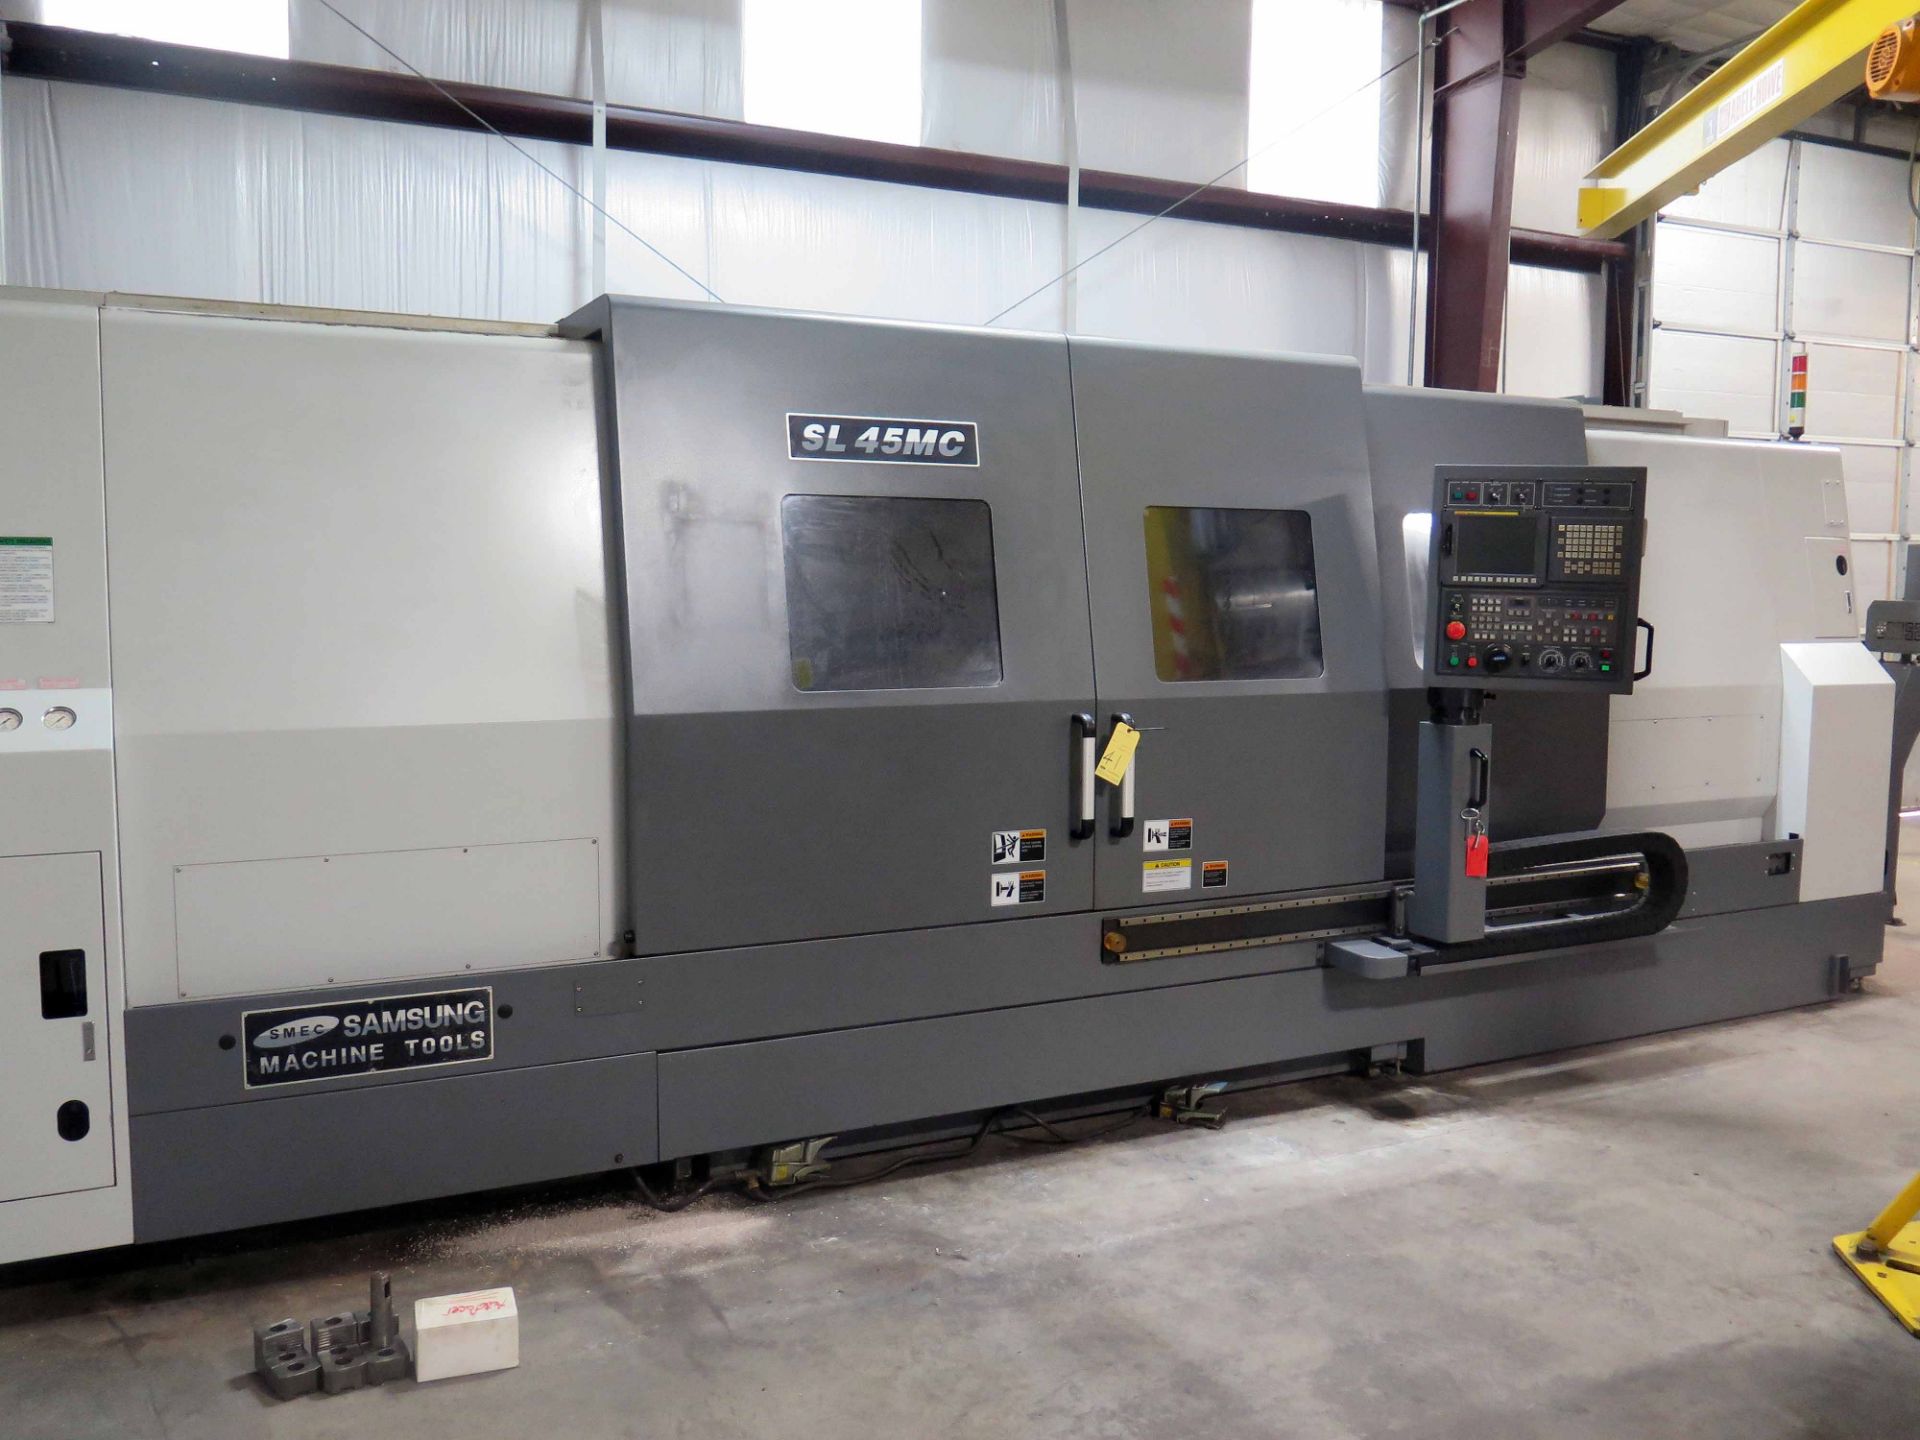 CNC LATHE, SAMSUNG MDL. SL45MC/3000, new 2010, Fanuc Series Oi-TD CNC control, 30.5" swing over bed, - Image 6 of 8